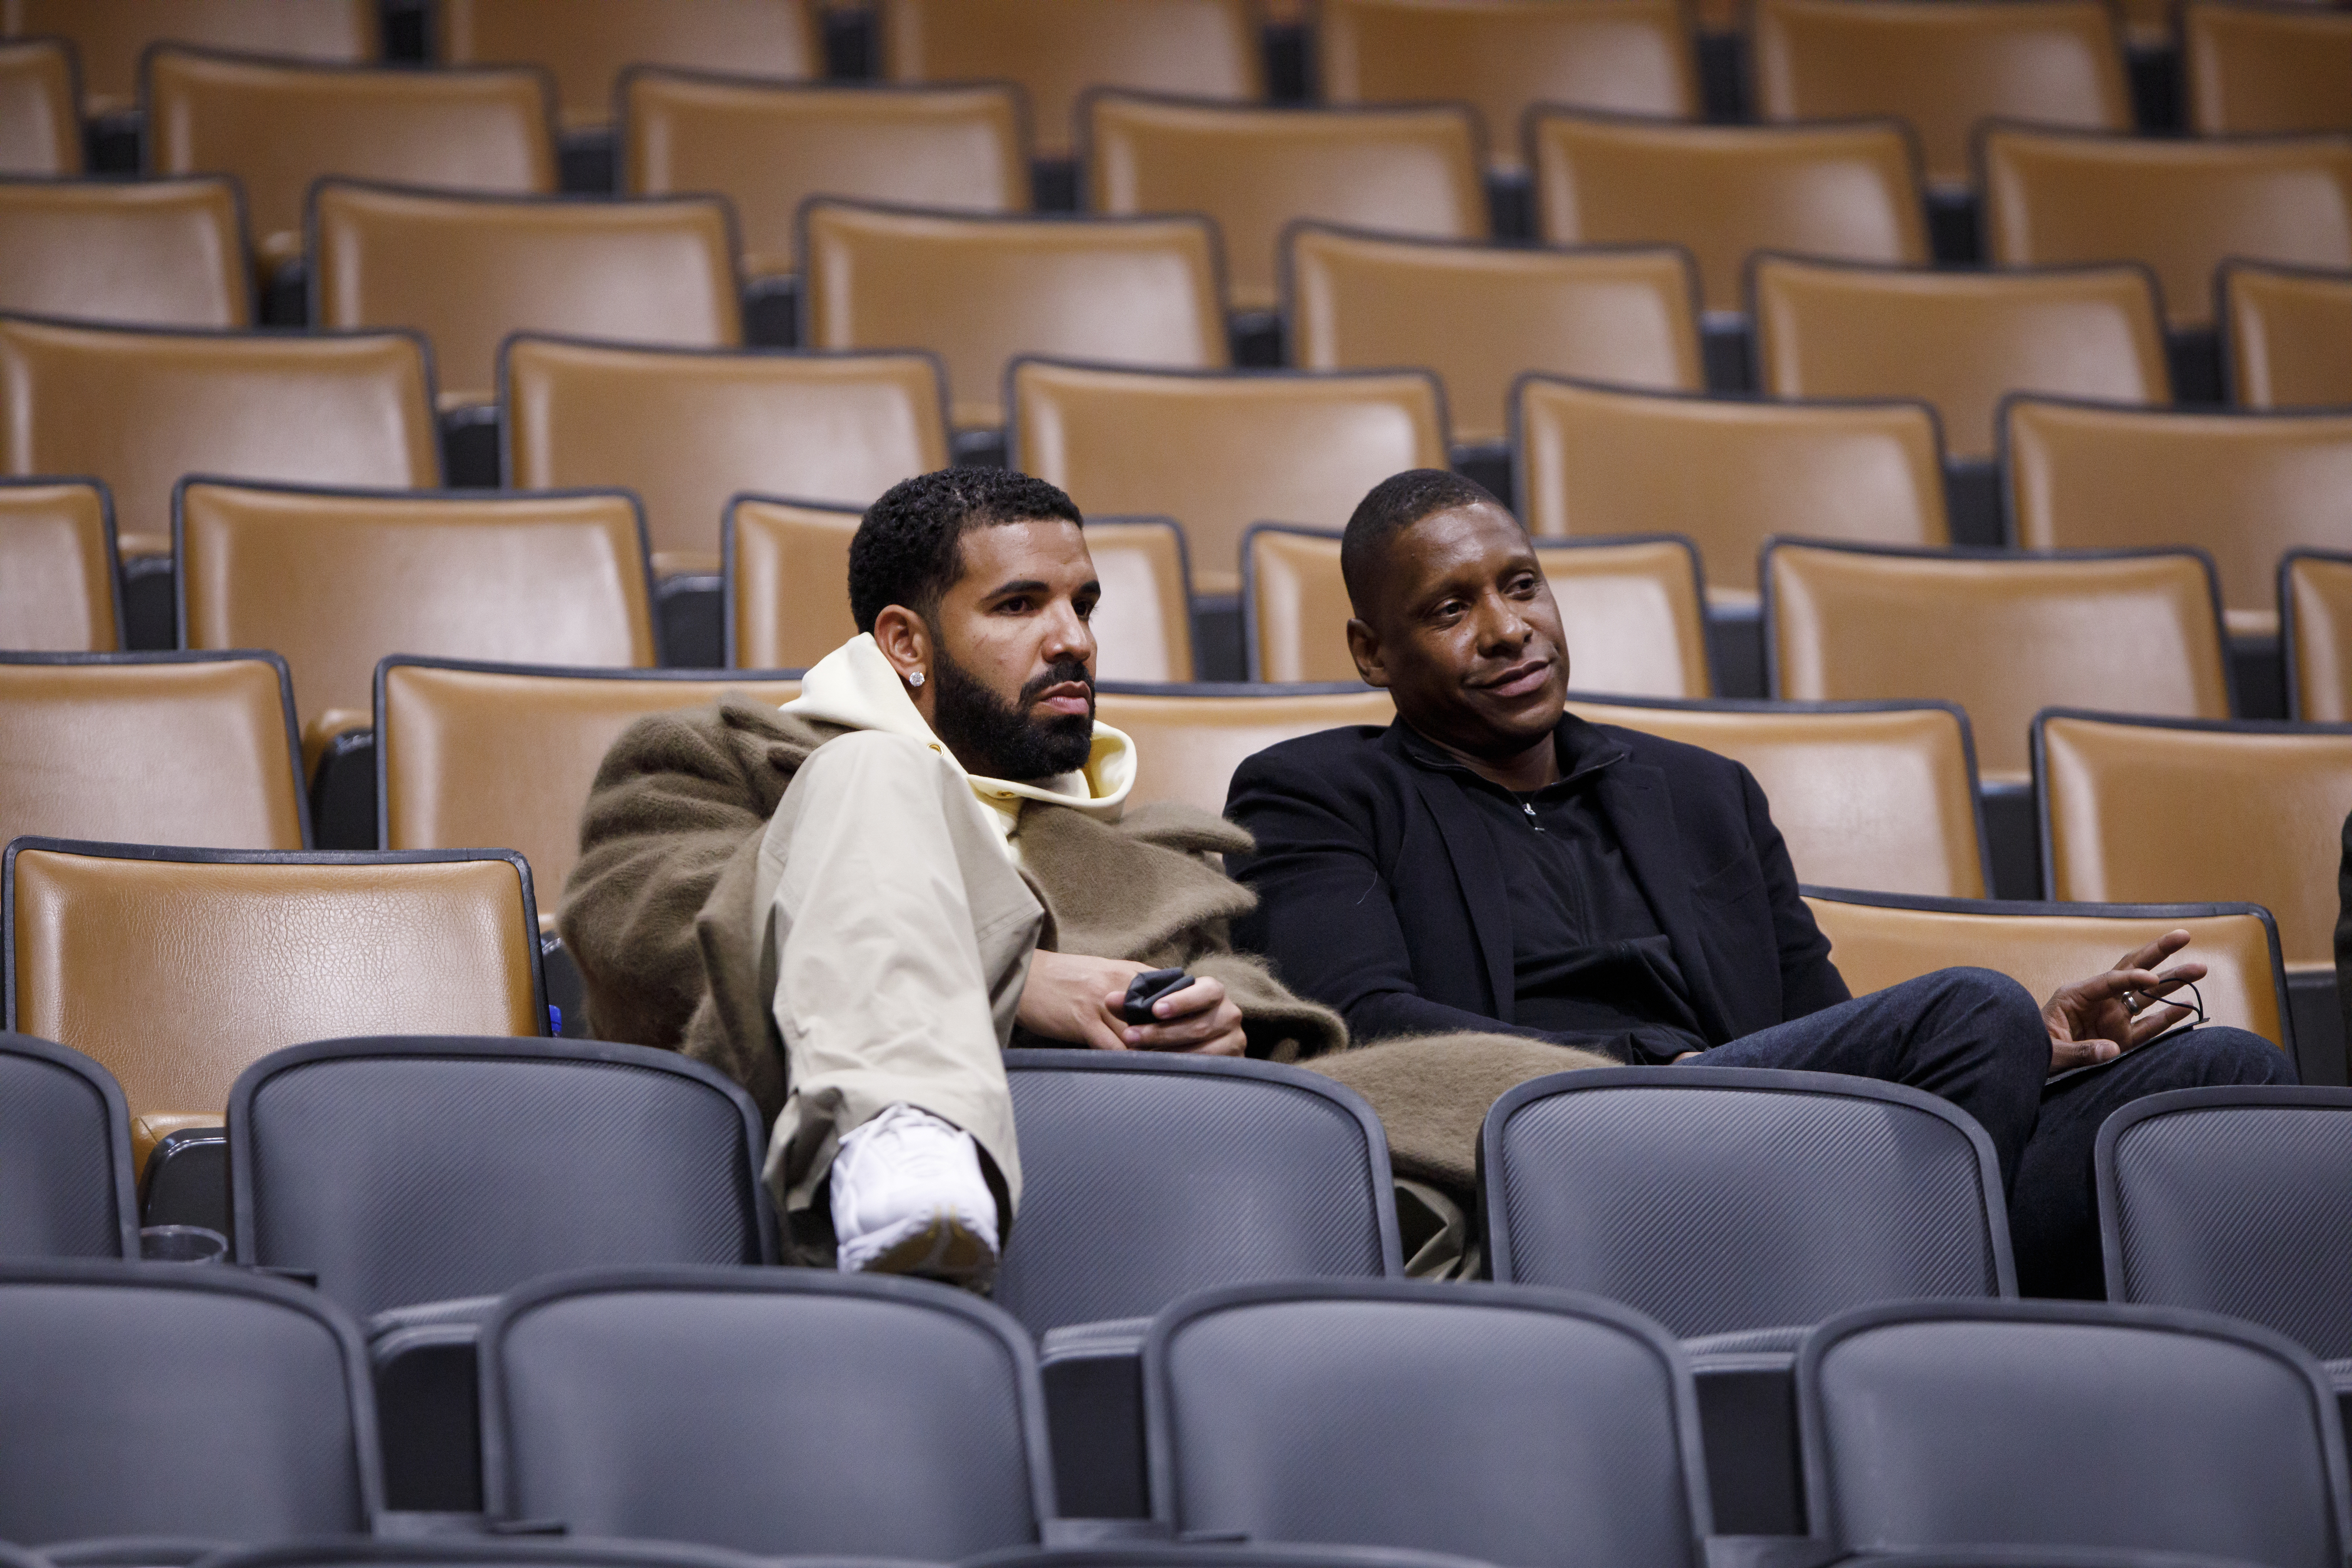 drake sitting in otherwise empty stadium seats with another man